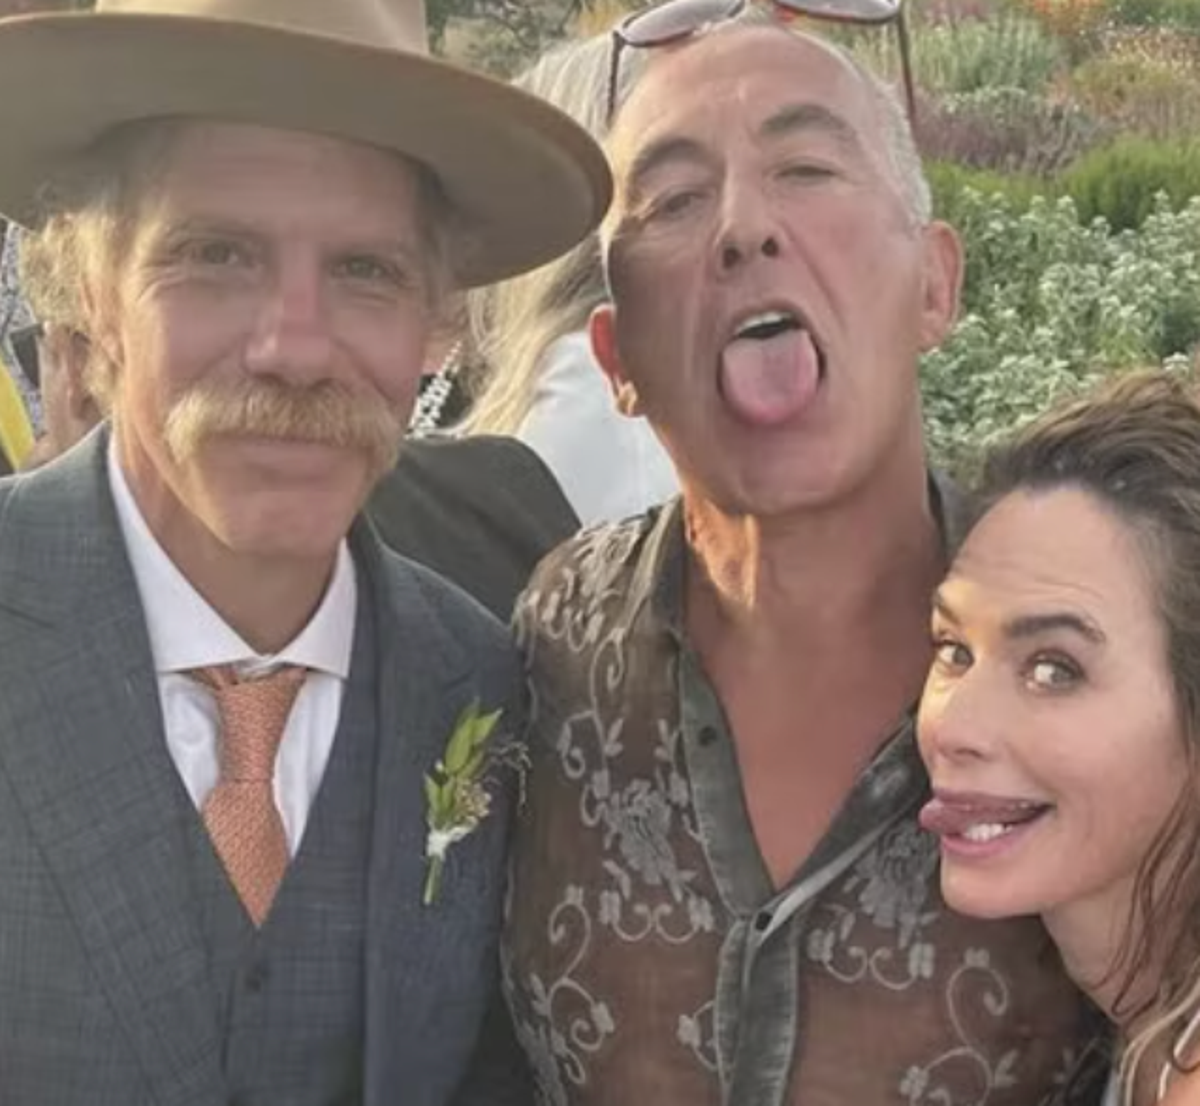 Game of Thrones stars reunite at Lena Headey’s marriage to Ozark star